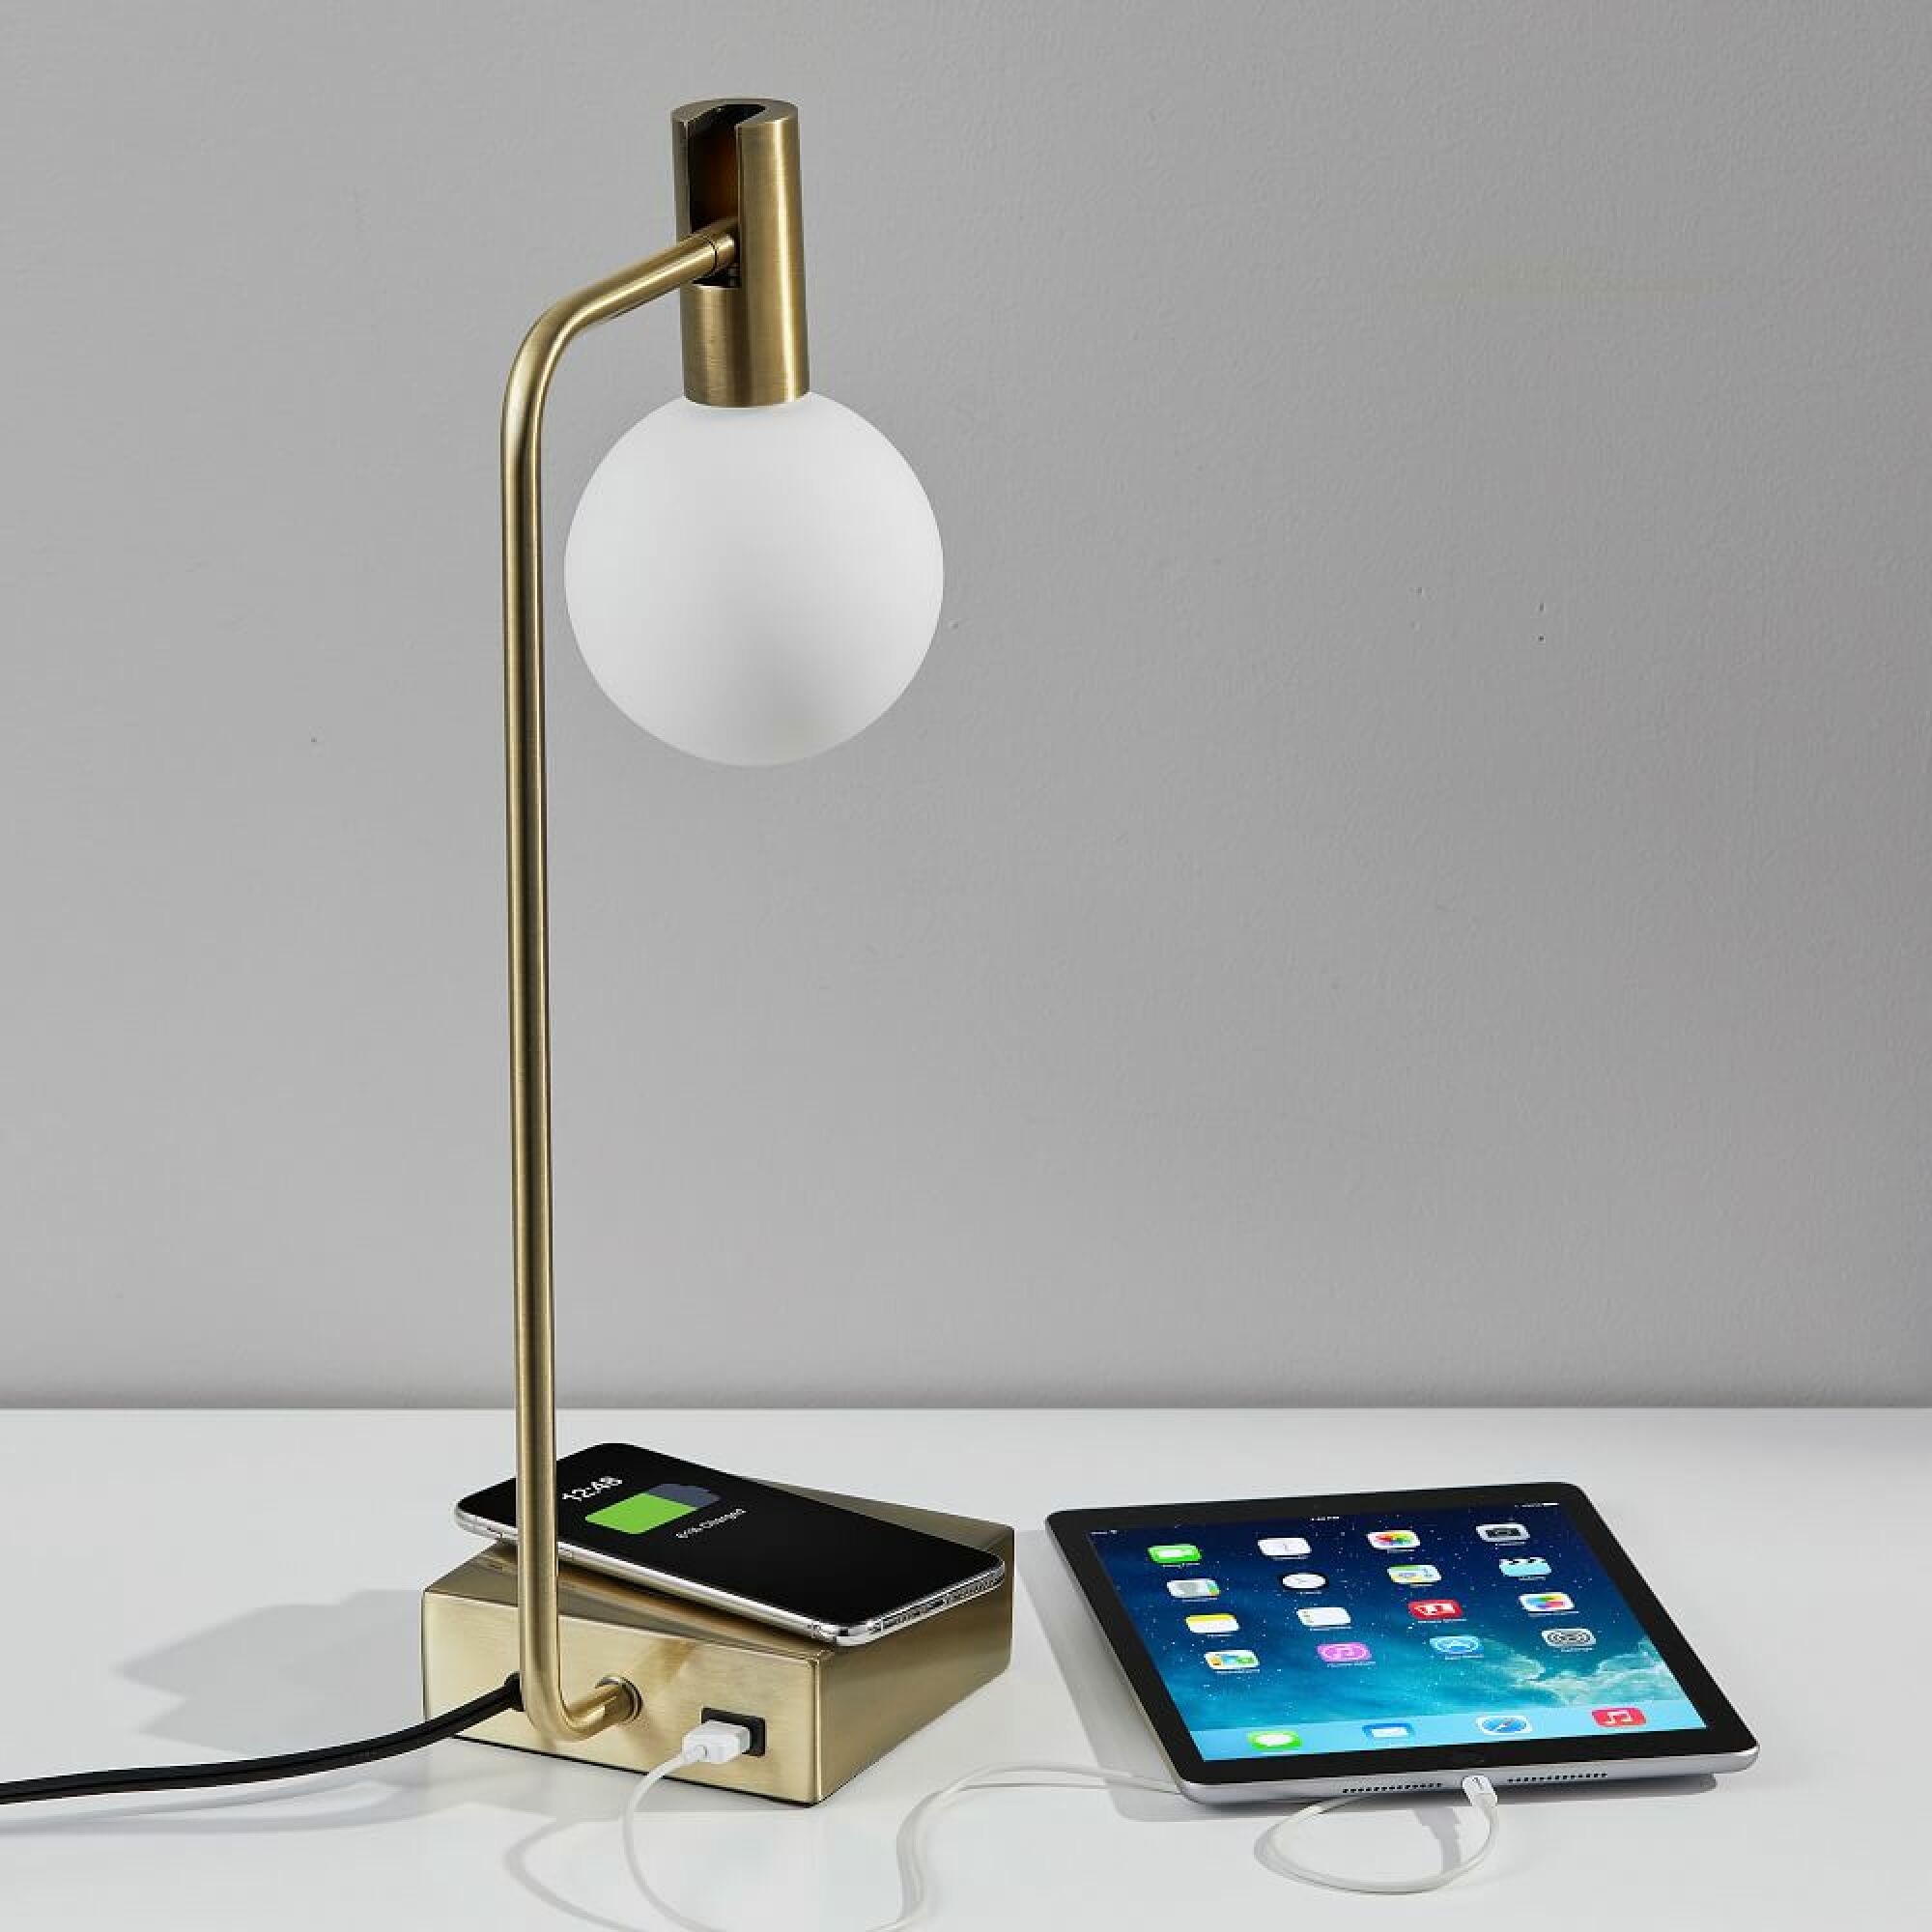 West Elm brass lamp with a smartphone charging on its base and an ipad plugged into its USB port.